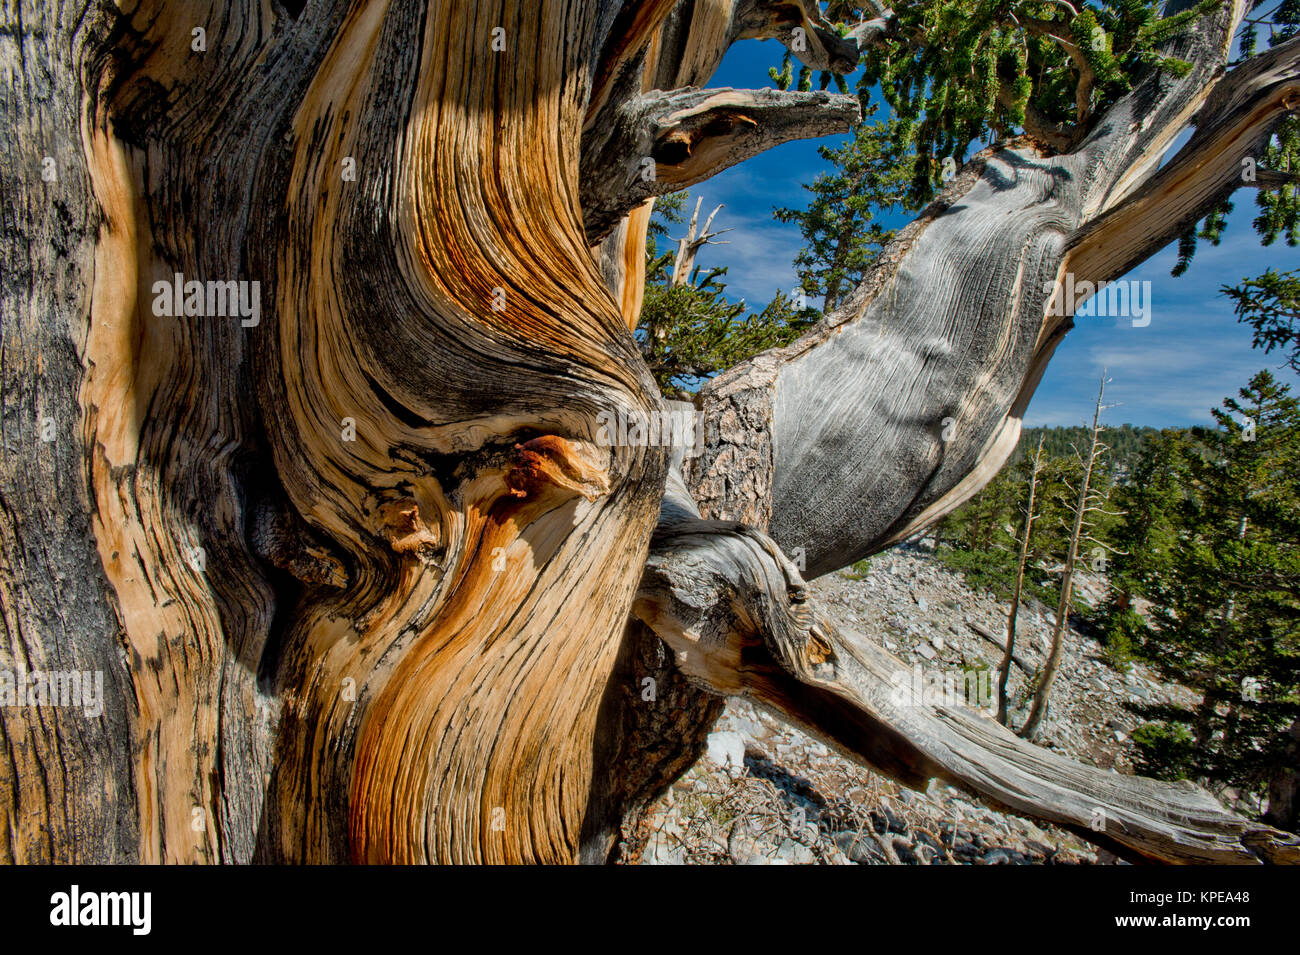 Bristlecone pine (Pinus longaeva) in Great Basin National Park Nevada. Oldest known non-clonal organism on earth. Stock Photo